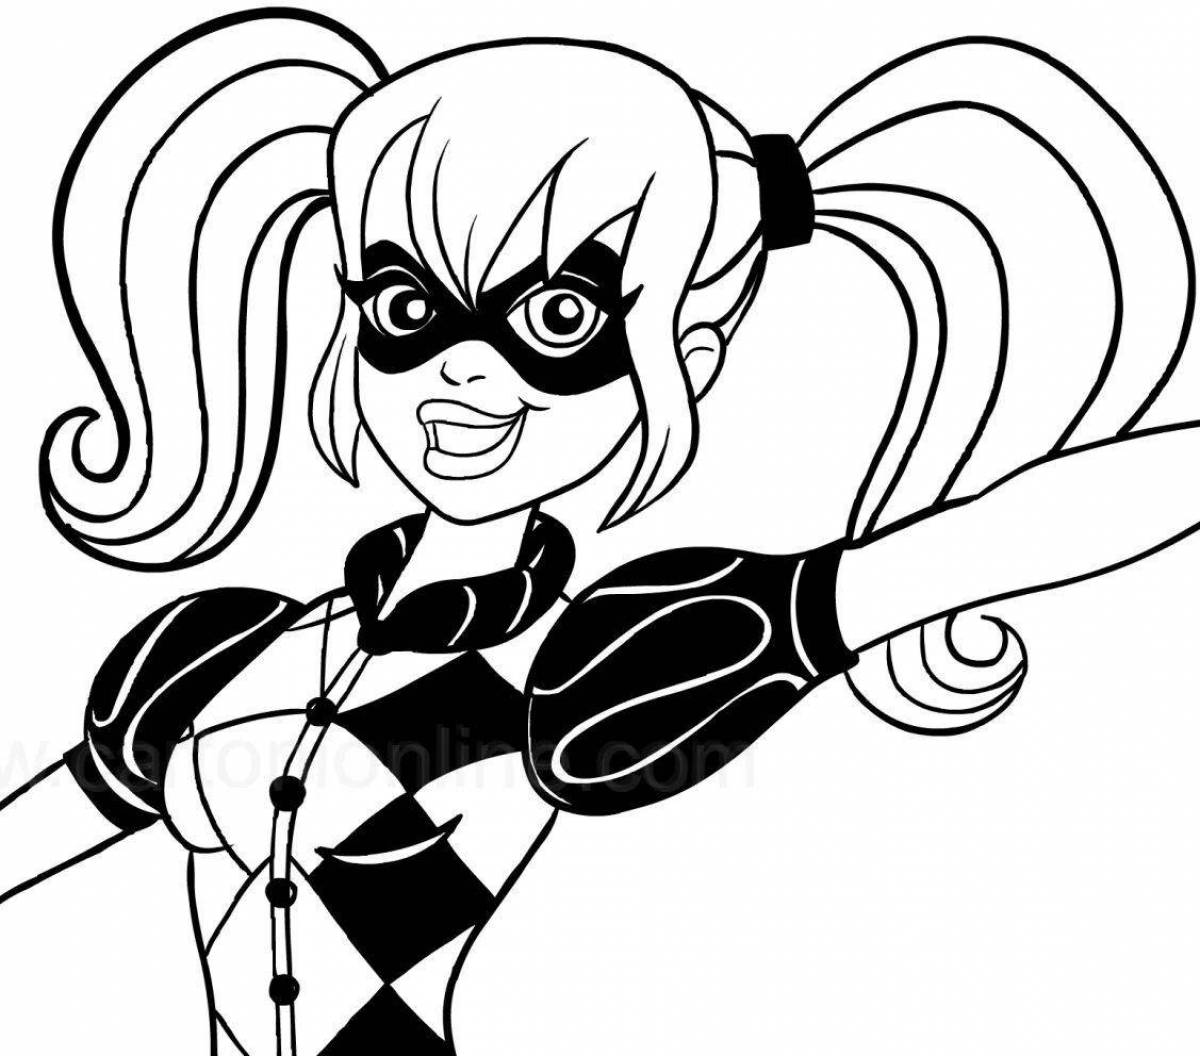 Animated harley quinn coloring book for girls